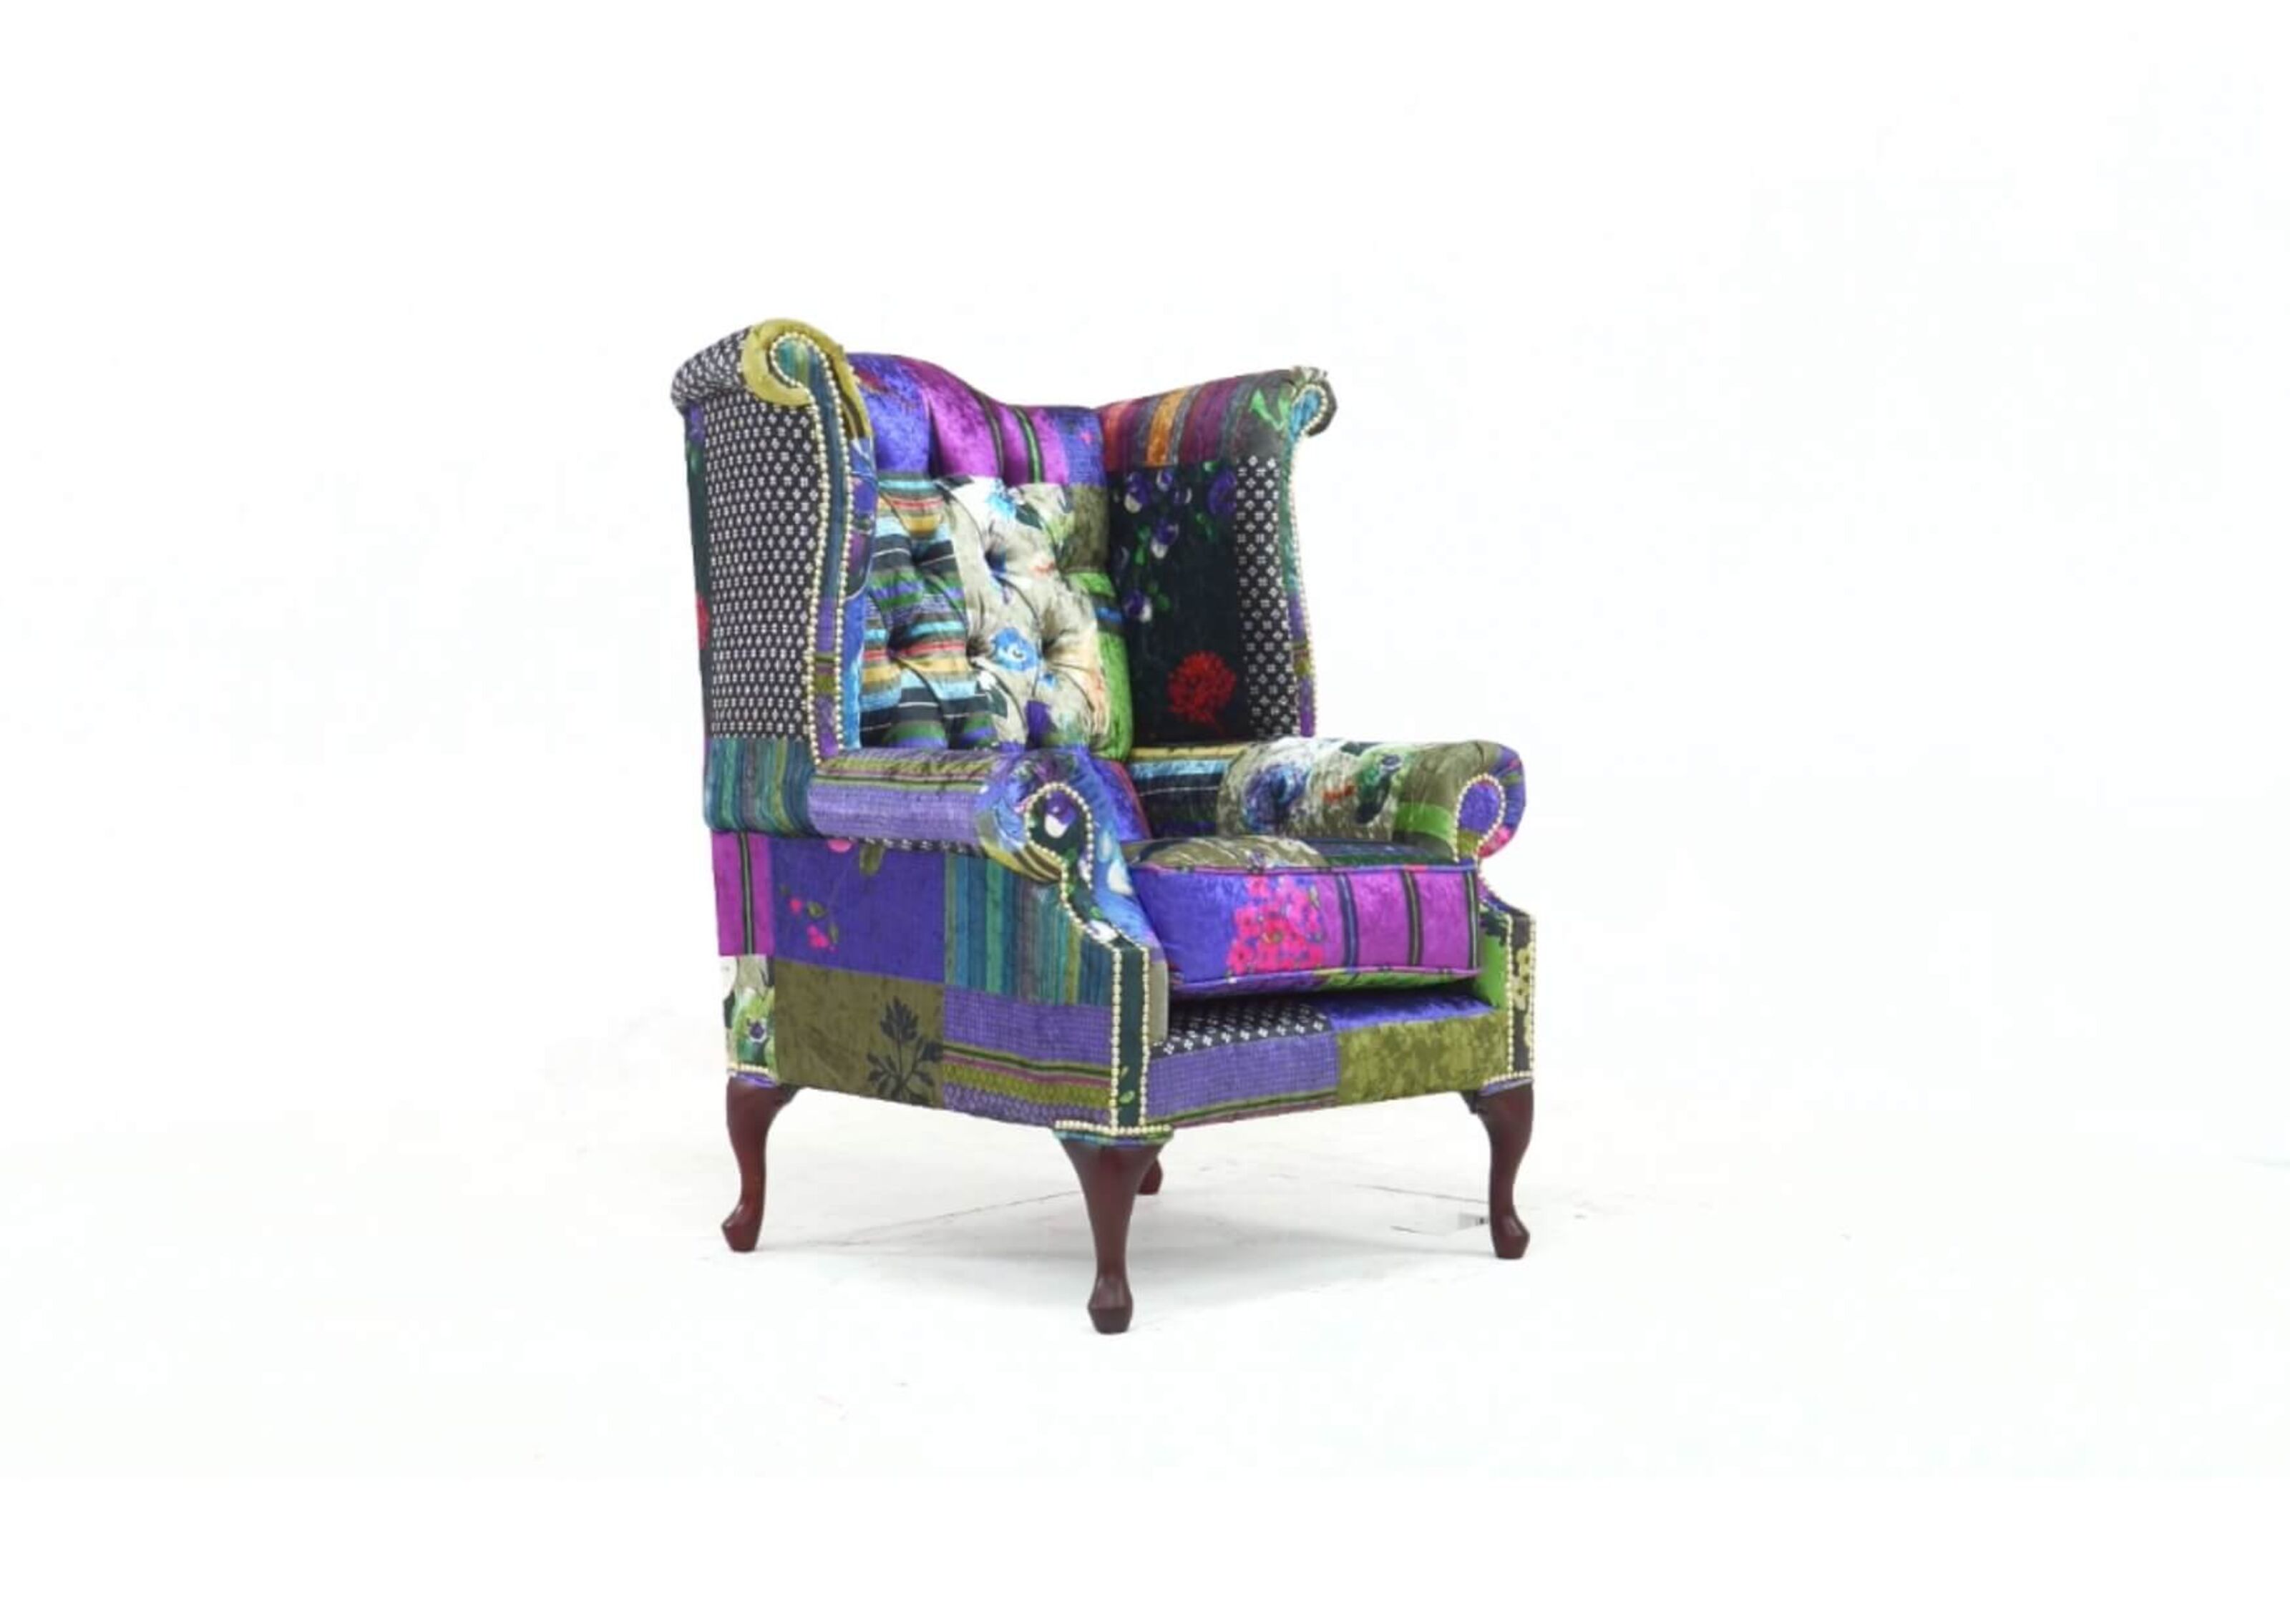 Patchwork Queen Anne Wing Chair in Cracked Wax Leather